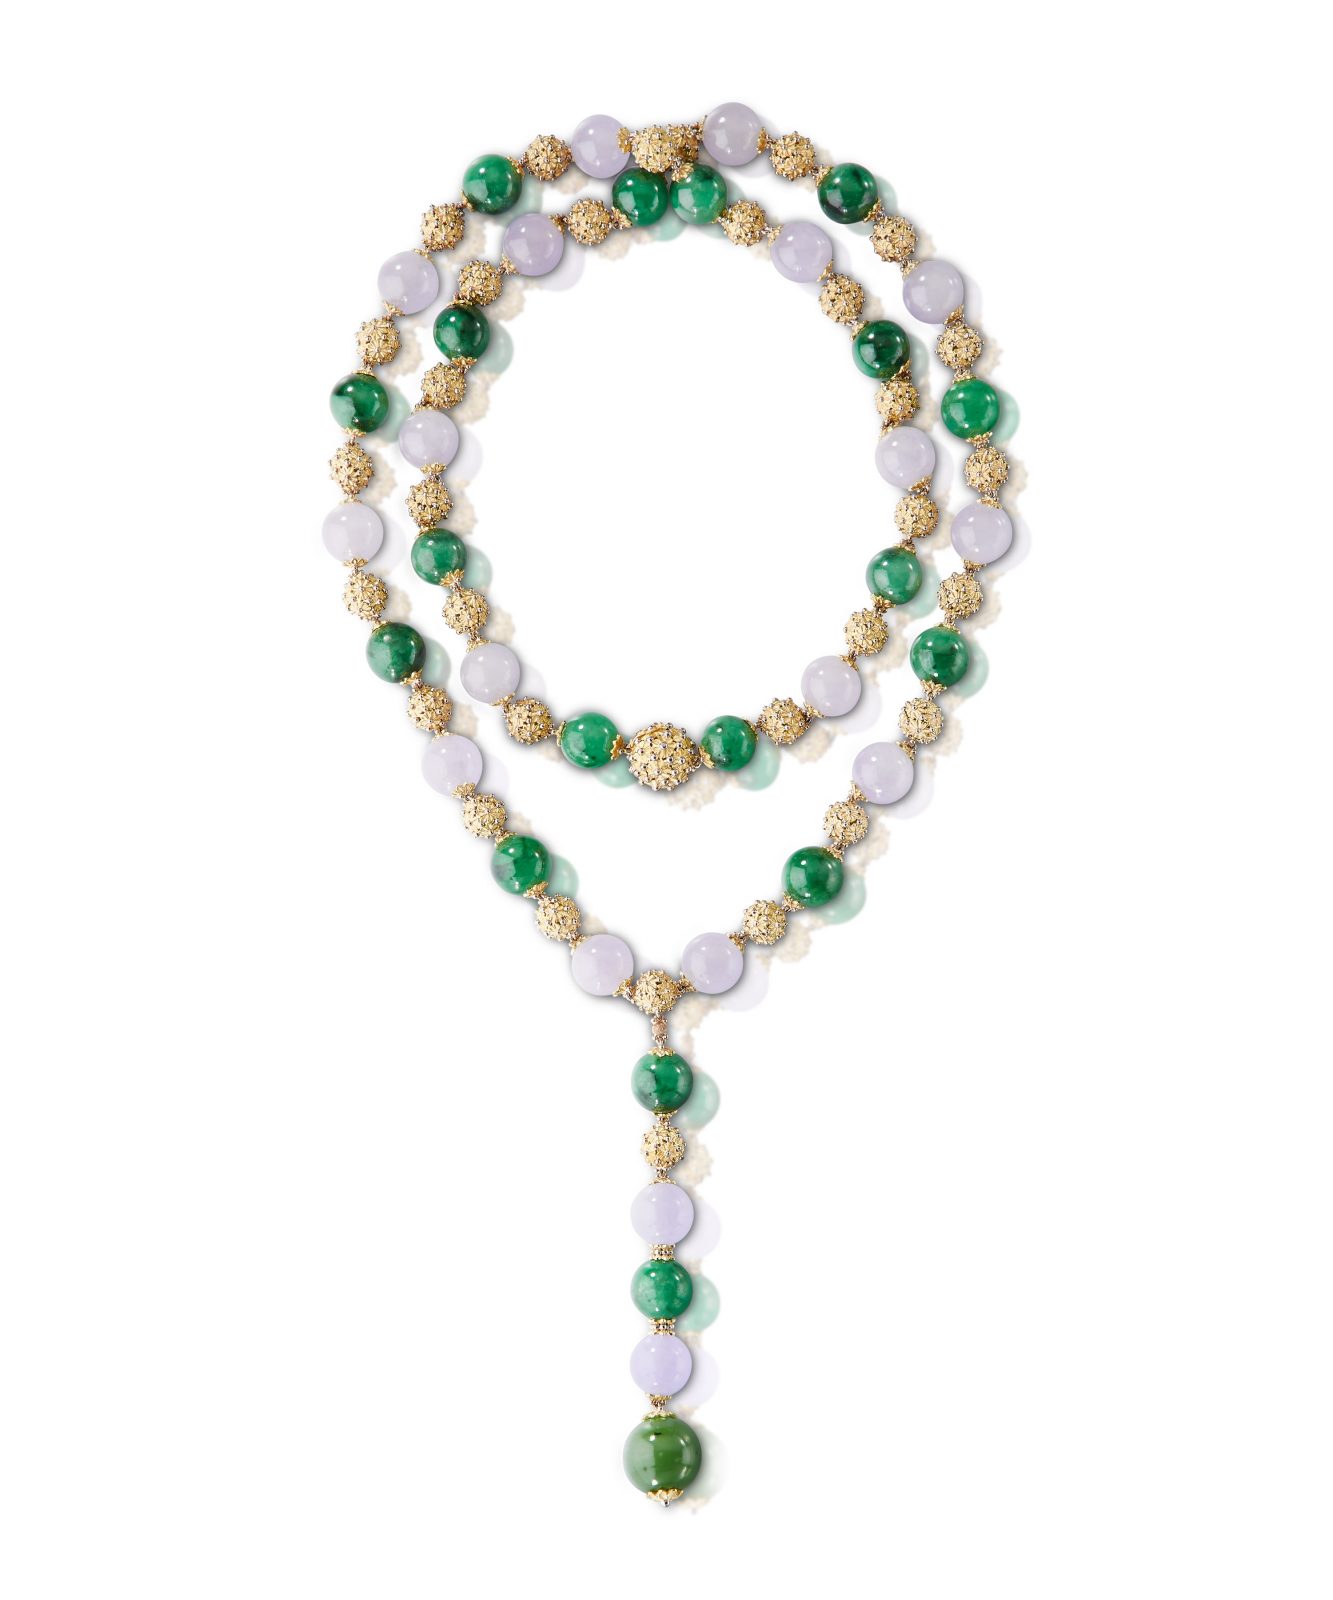 In Bloom: The Haute High Jewelry Spring Guide